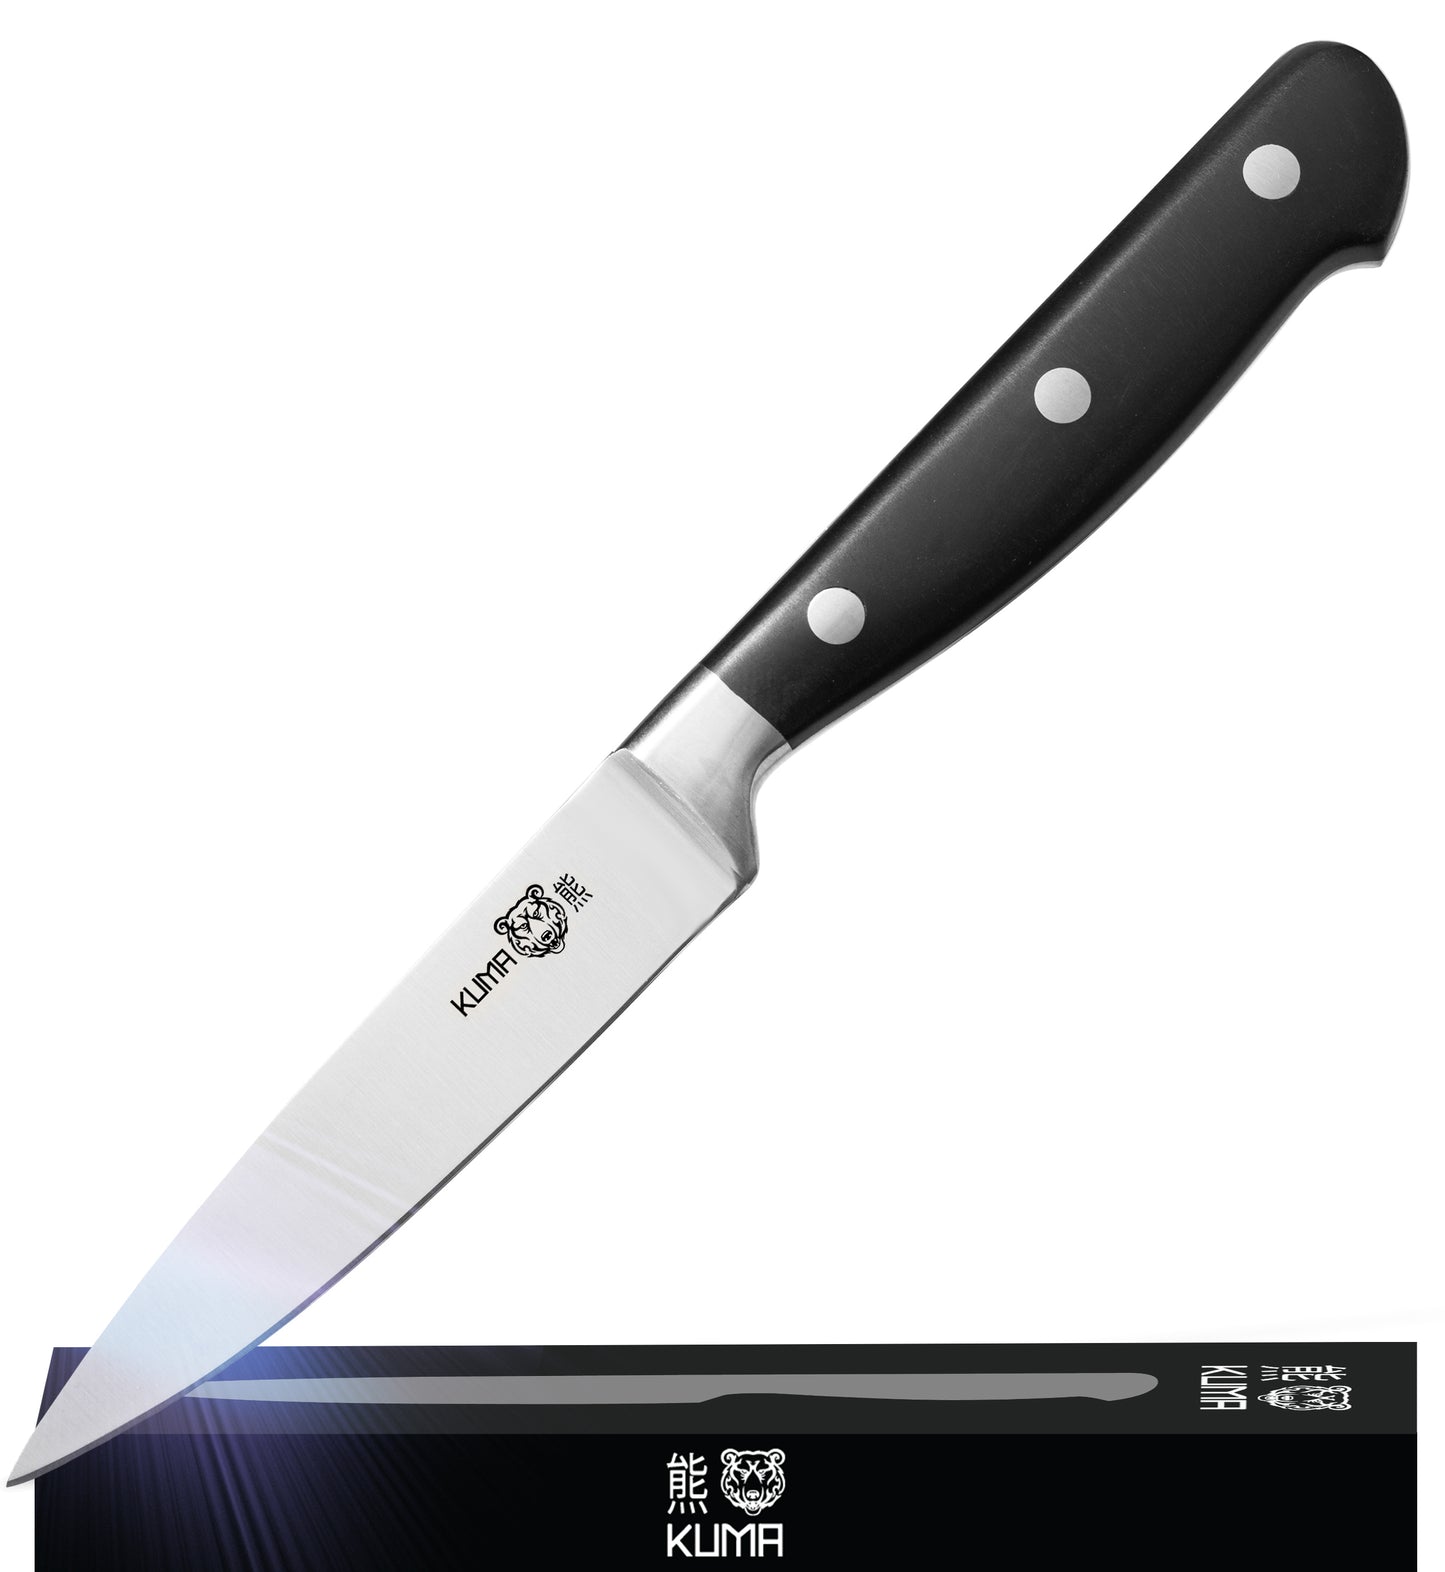 KUMA Versatile Paring Knife Classic - SLICE WITH PRECISION - Stainless Steel Blade